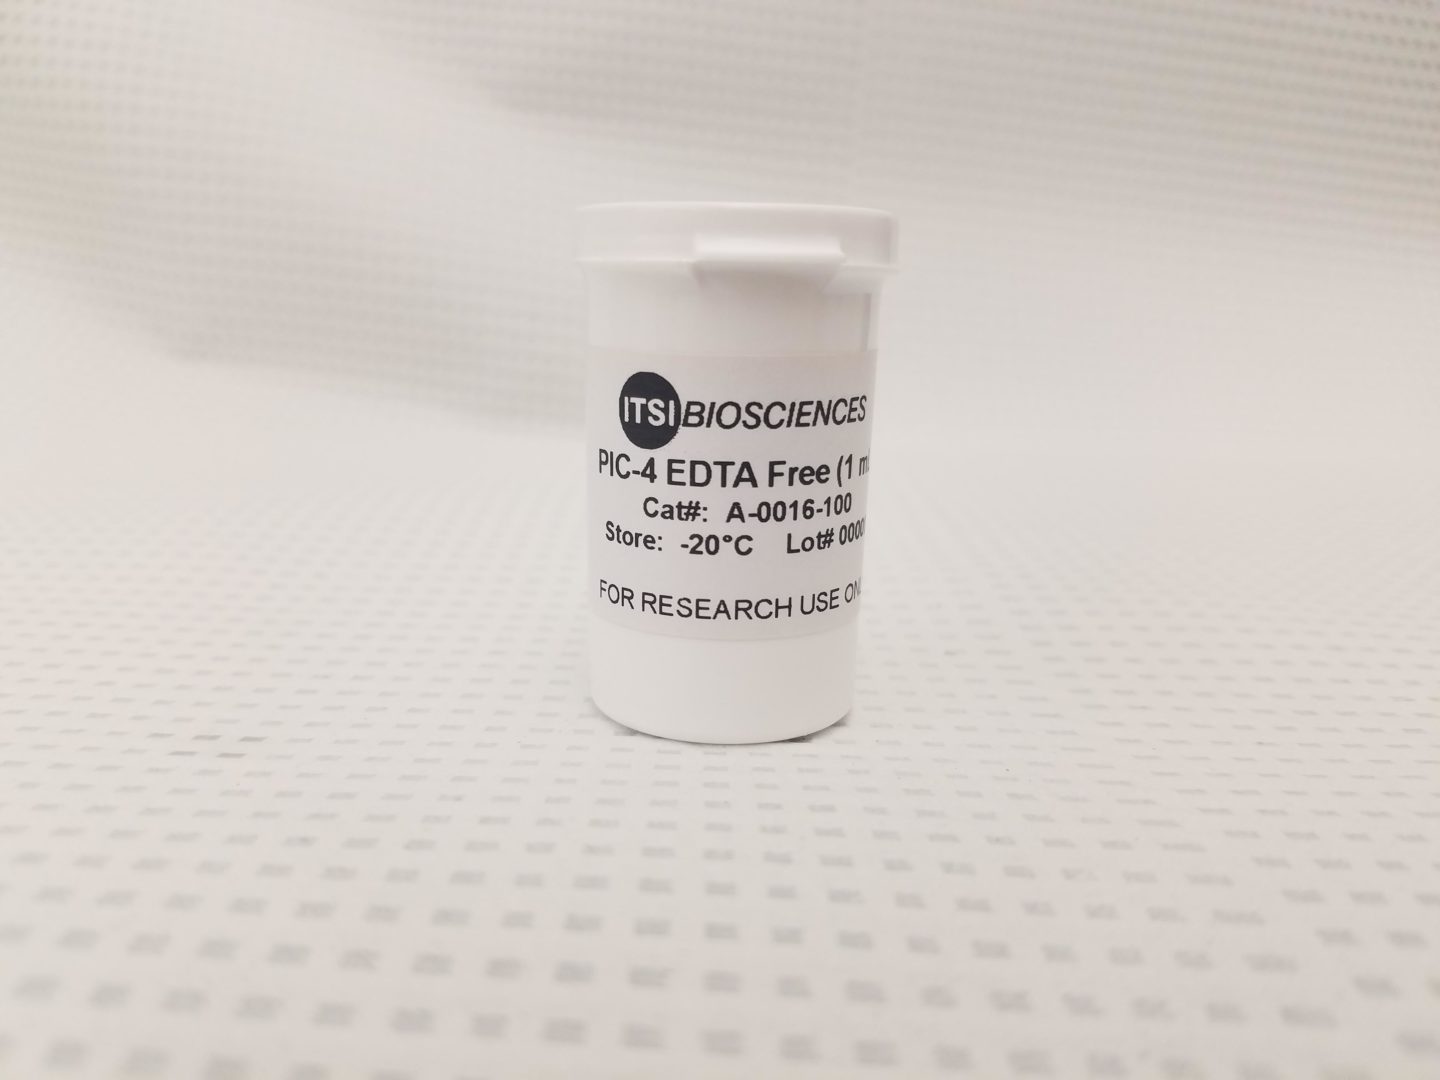 Protease Inhibitor Cocktail – EDTA Free (PIC-4, A-0016-100)